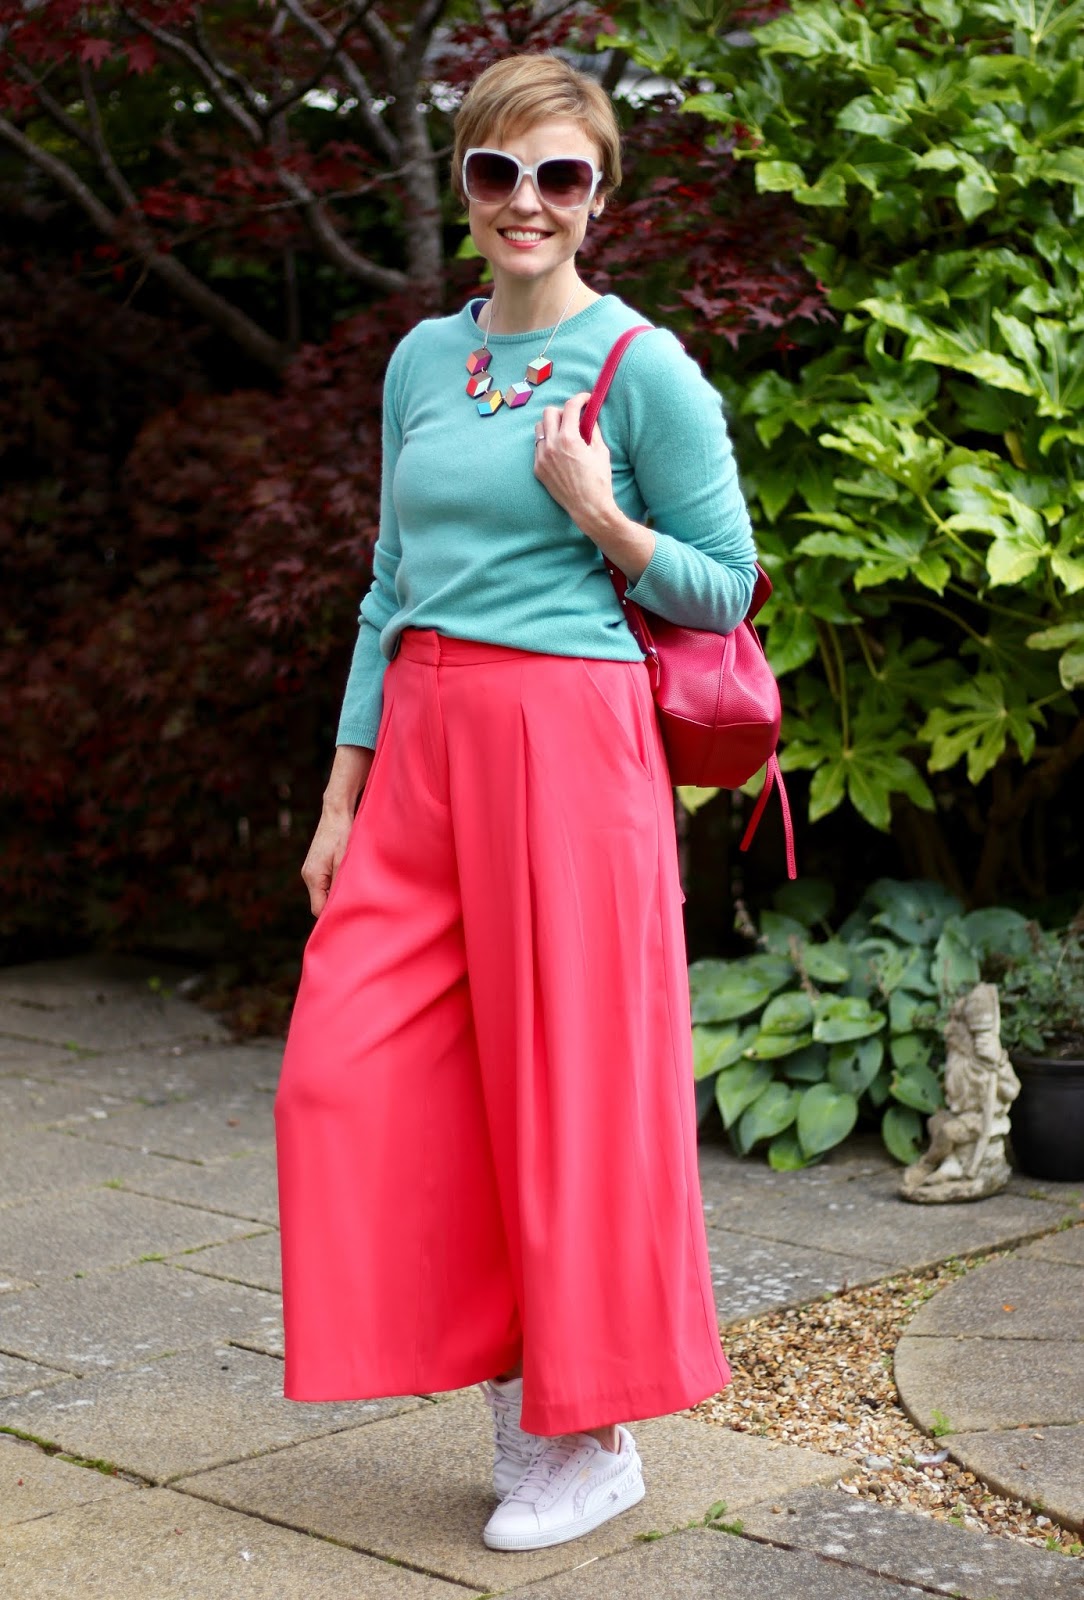 Styling baggy neon pink culottes and an aqua cashmere knit | Fake Fabulous